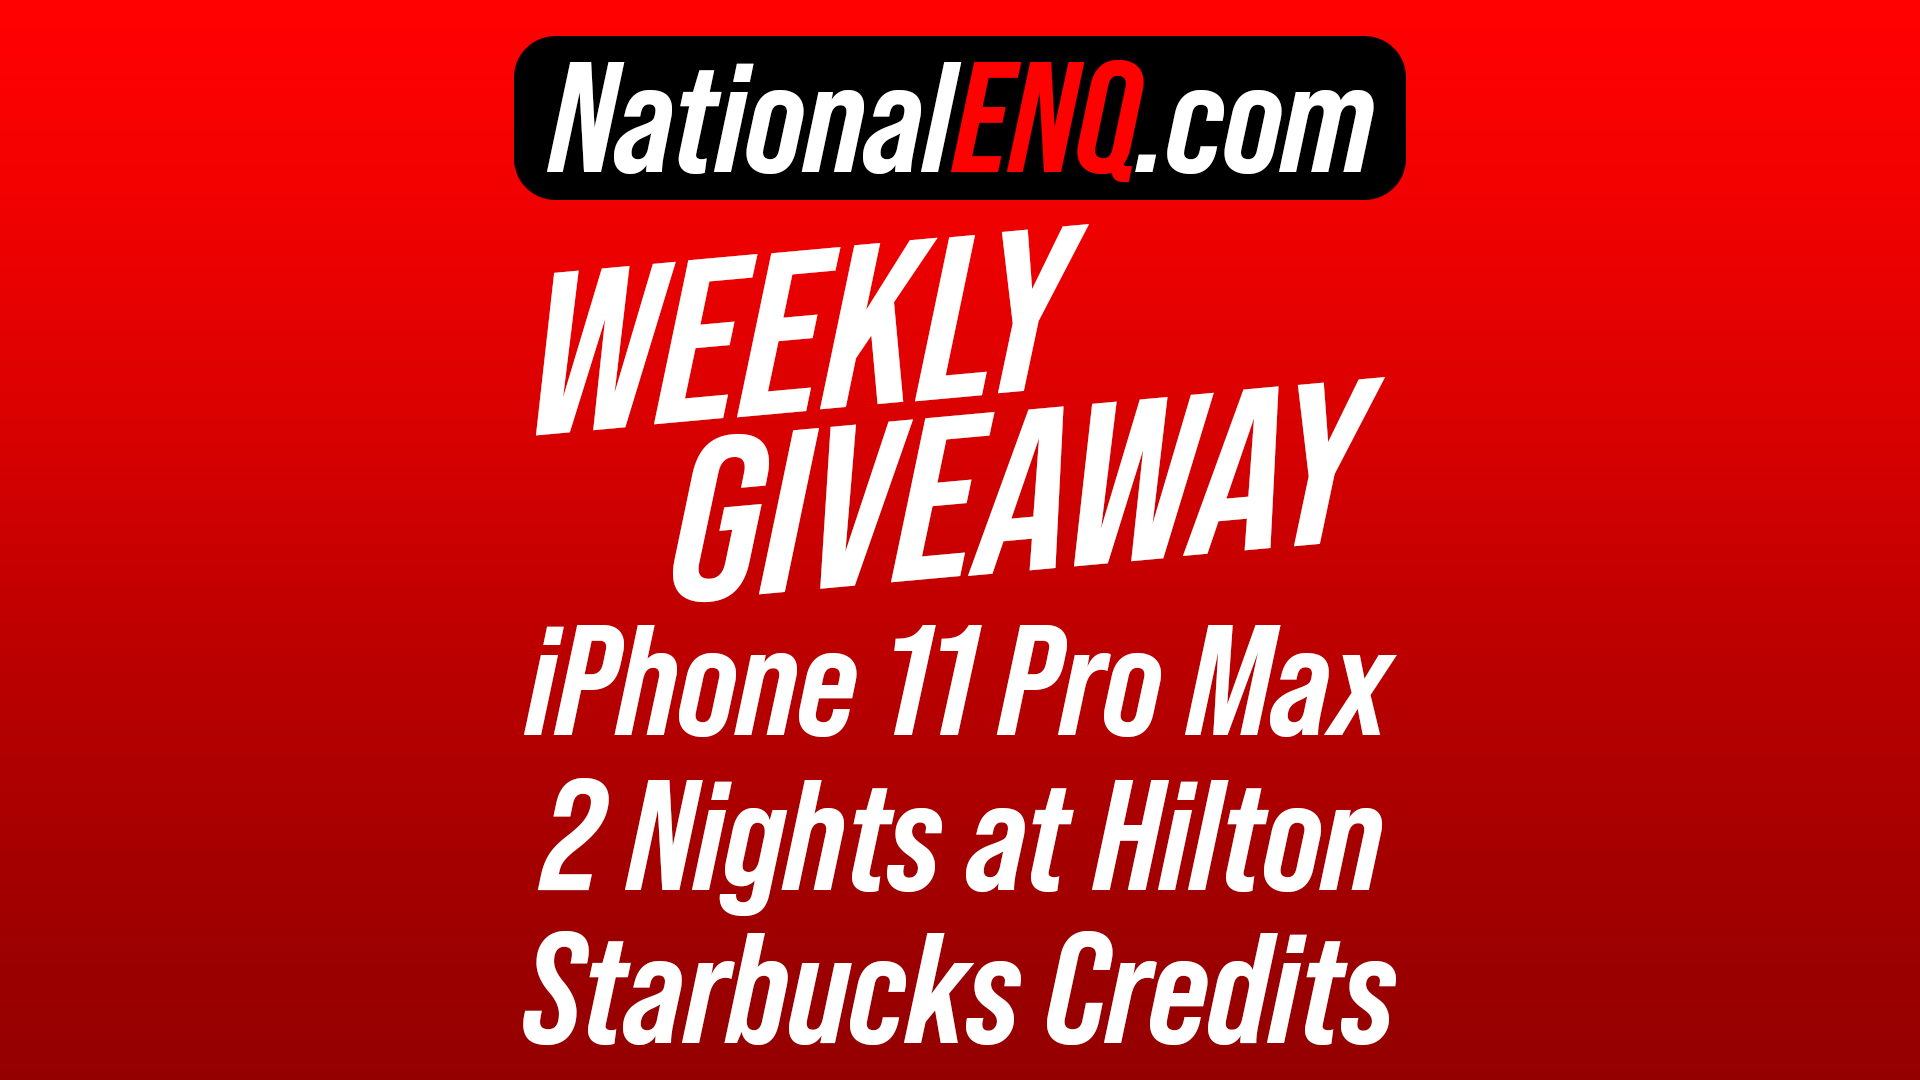 National ENQ Readers Are Rewarded! iPhone 11 Pro Max, Nights at Hilton & Starbucks Giveaway!